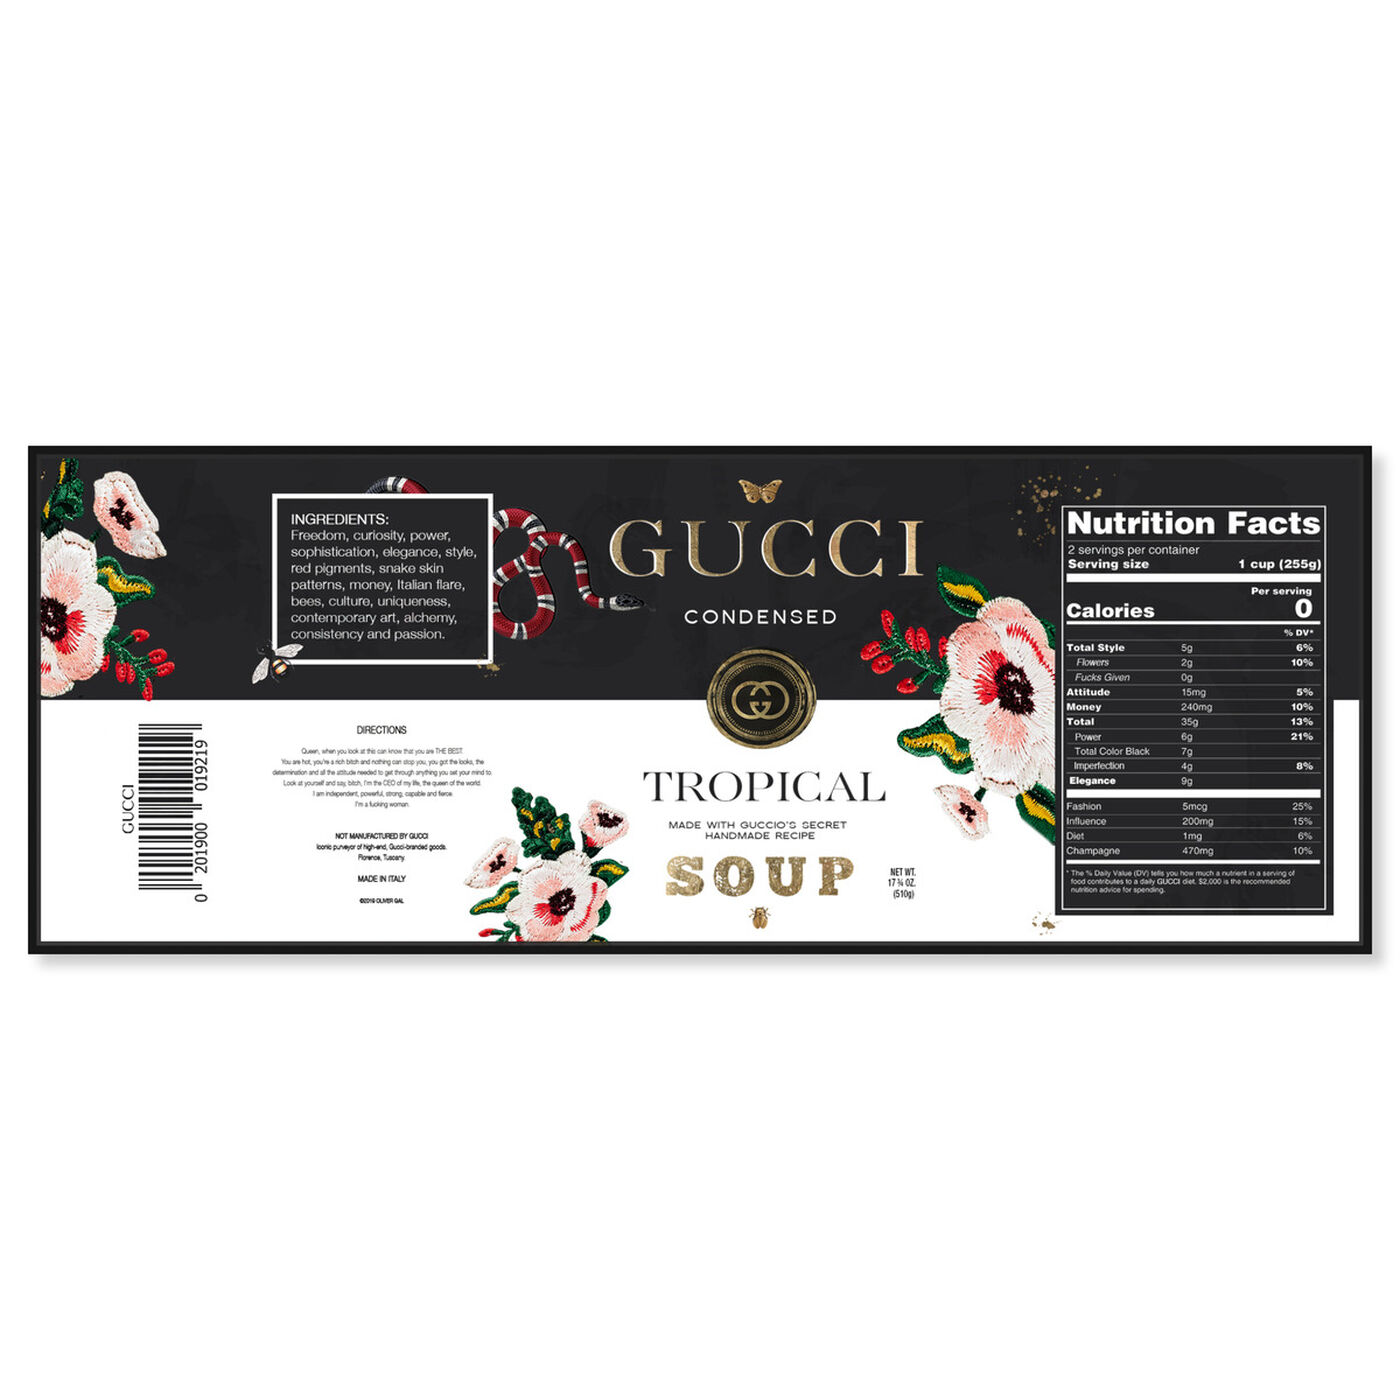 Gucci soup can art for sale